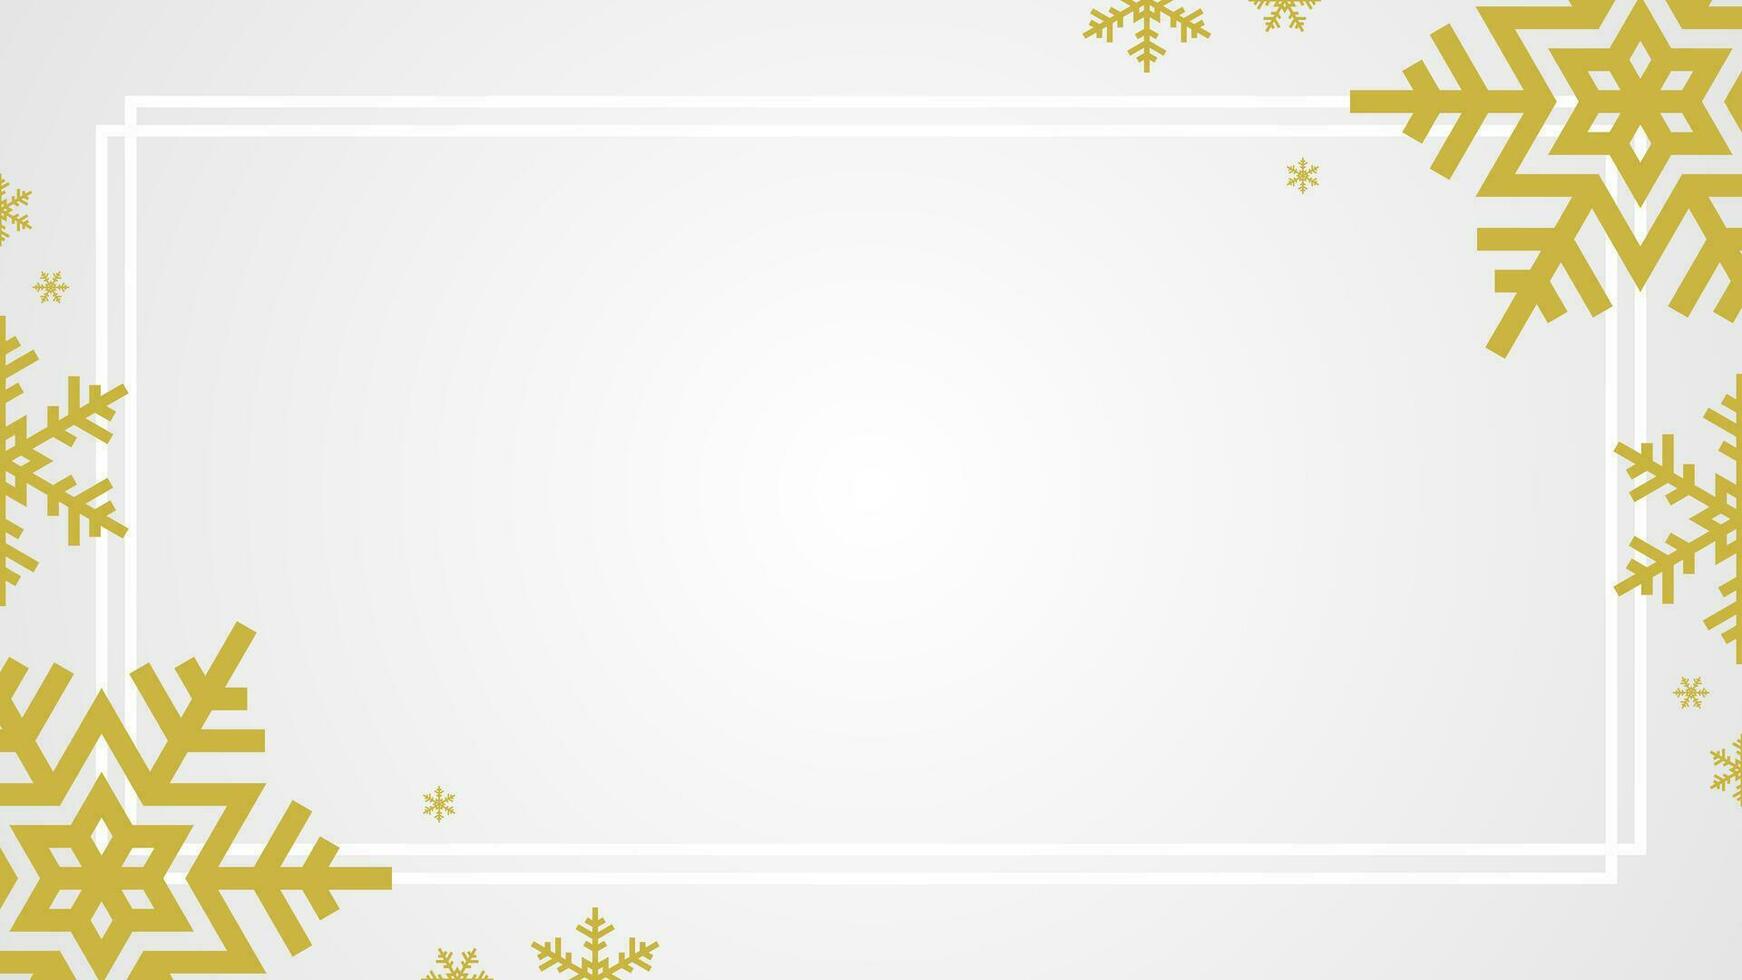 Simple Light White Christmas Frame Border With Golden Snowflakes Decoration Vector Background